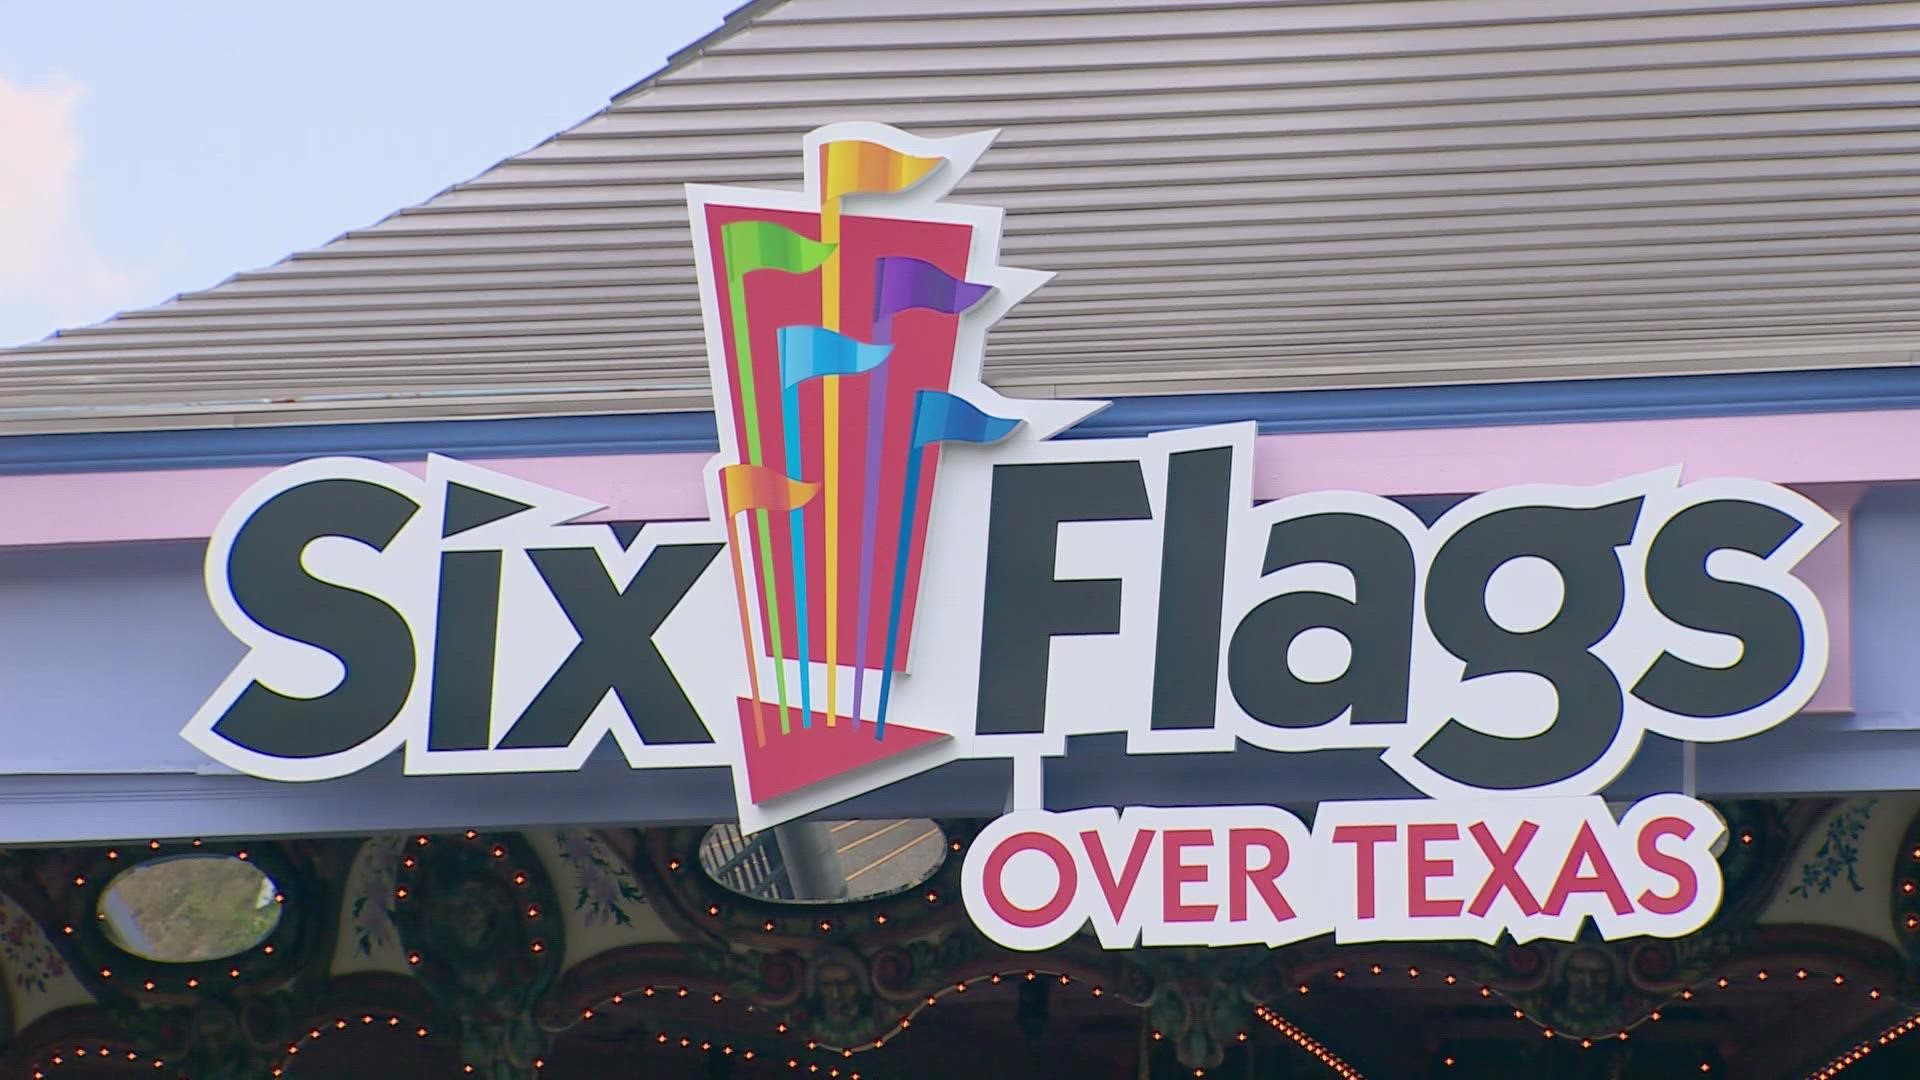 Six Flags is holding a job fair at the park on Saturday from 10 a.m. to 5 p.m.